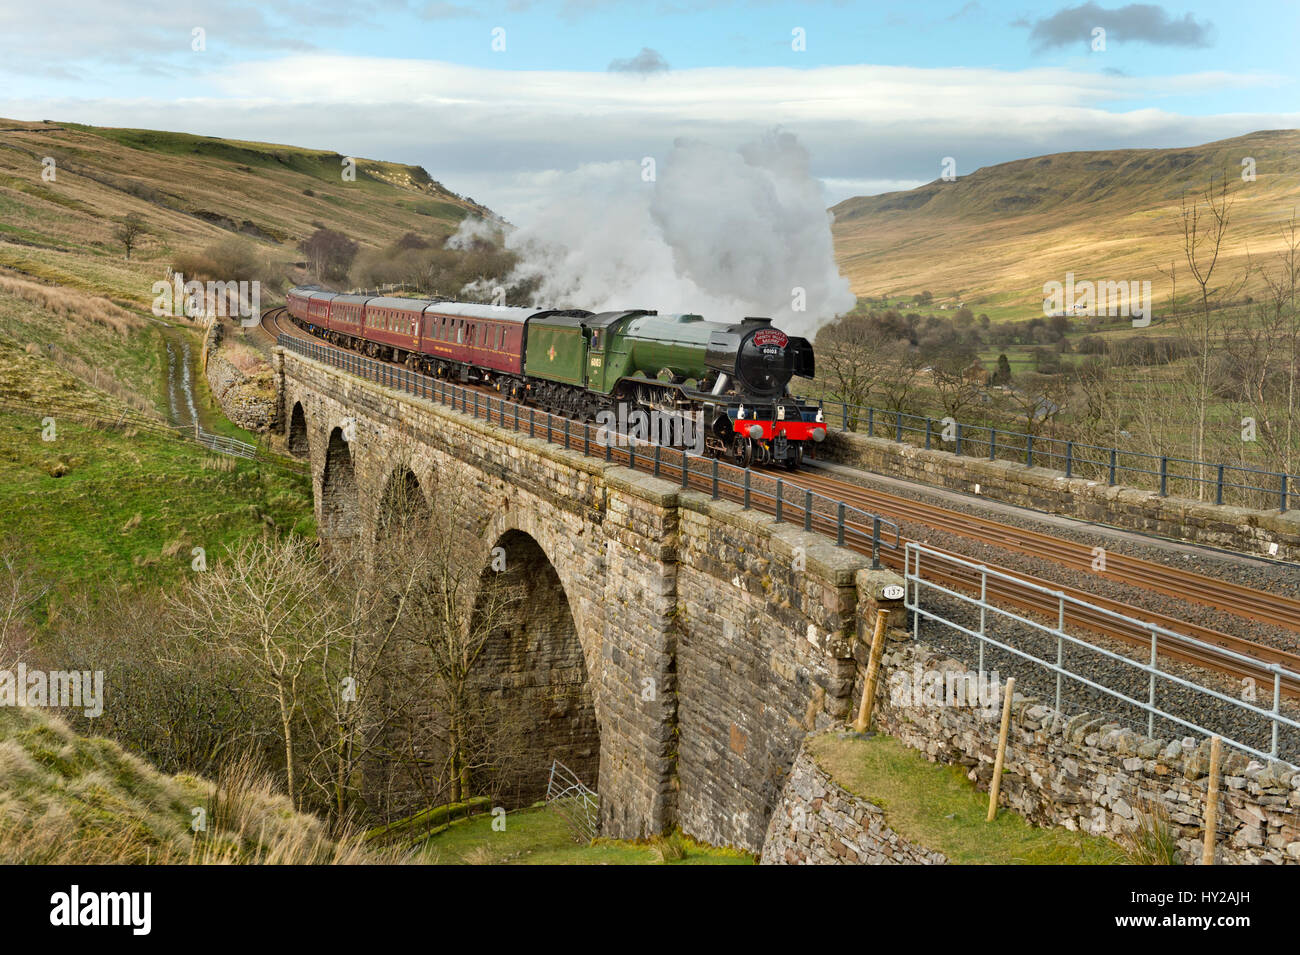 Cumbria, UK. 31st Mar, 2017.  The Flying Scotsman passes over Ais Gill Viaduct near the summit of the Settle-Carlisle railway line, 31st March 2017. The journey over the line, from Oxenhope via Skipton to Carlisle and return, marks the first day of its re-opening following closure for over a year. The closure was caused by a major landslip near Appleby. Credit: John Bentley/Alamy Live News Stock Photo